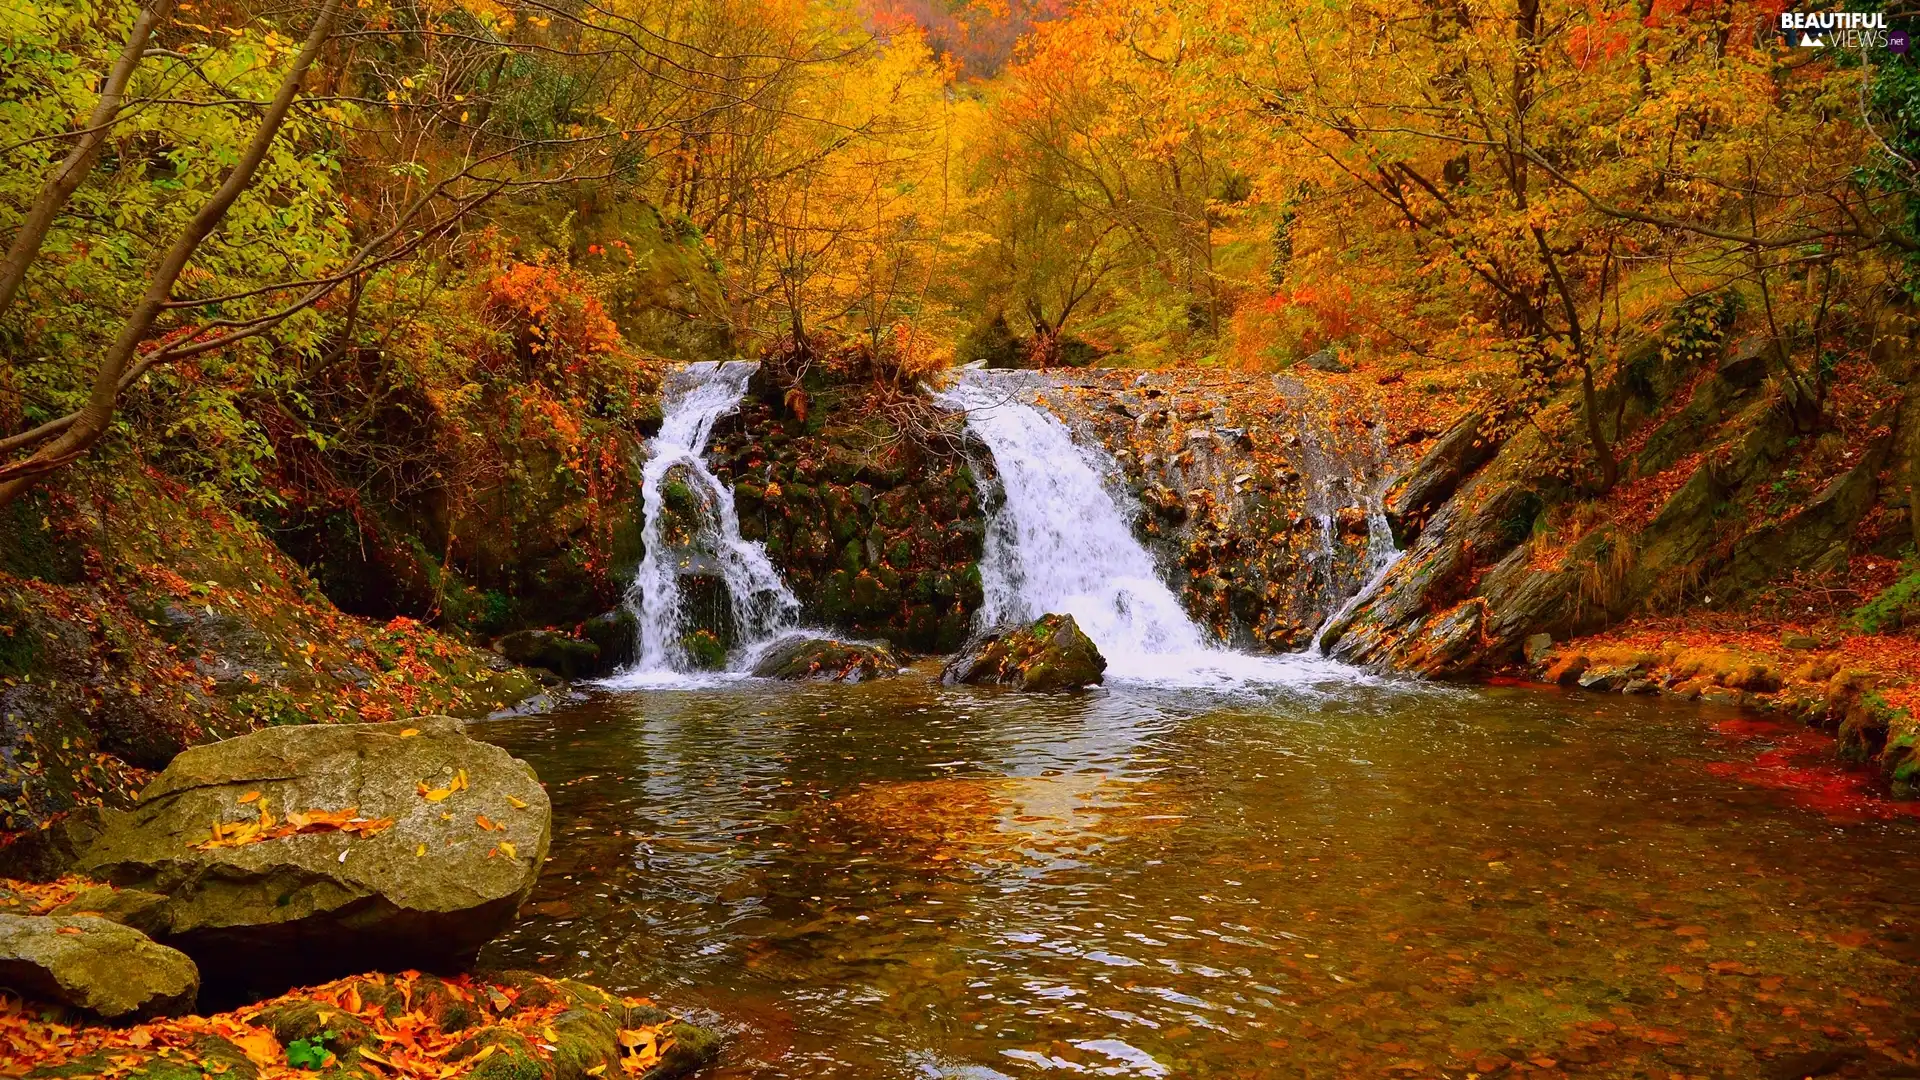 trees, River, rocks, autumn, viewes, waterfall